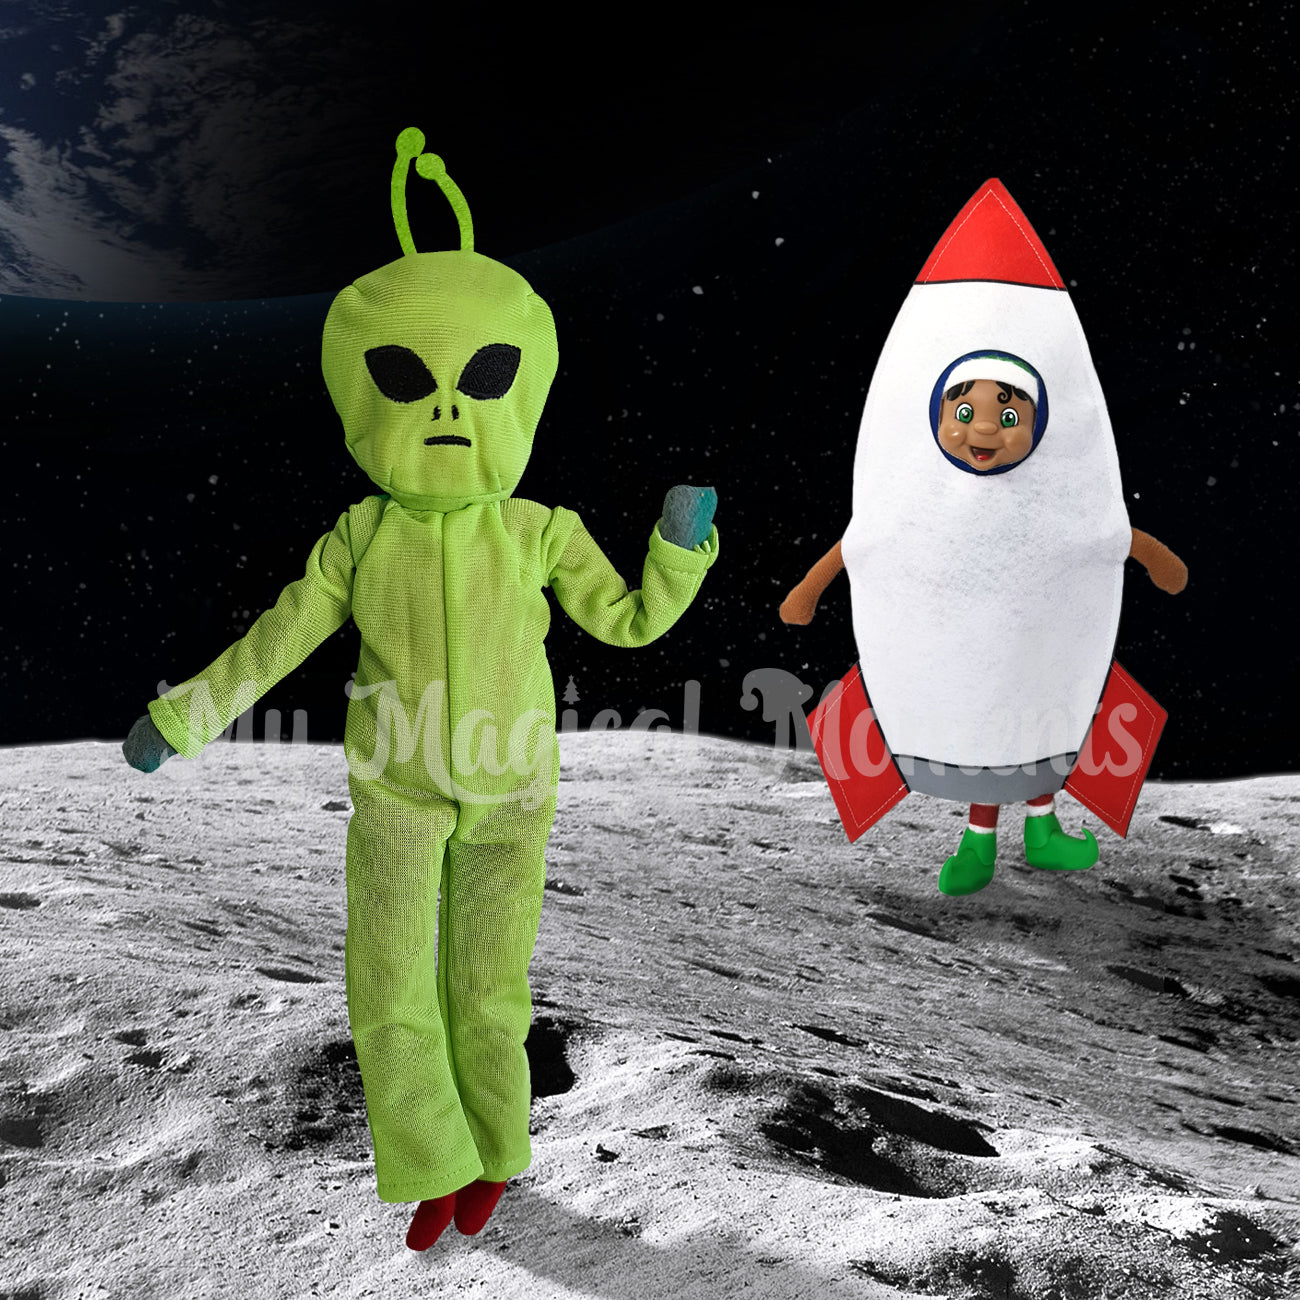 Elf dressed as an alien on the moon with a spaceship